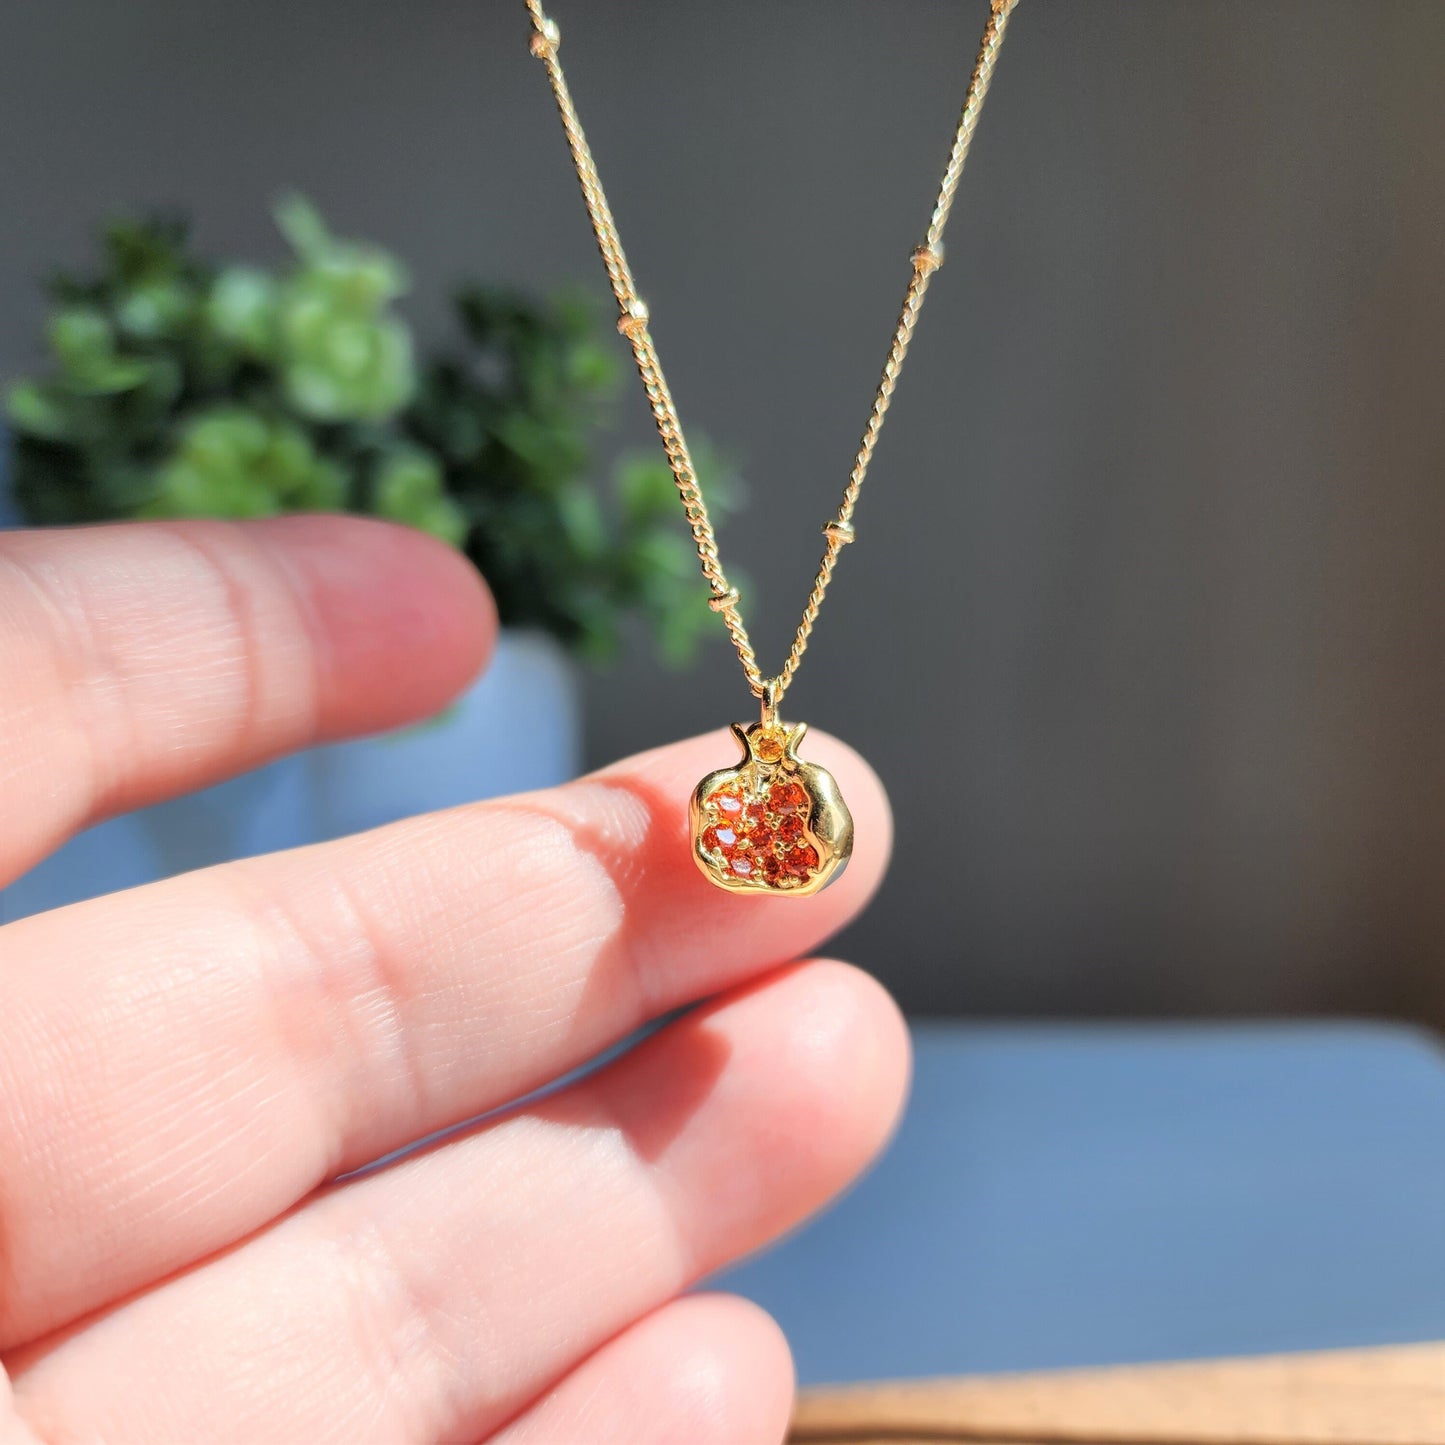 Gold pomegranate necklace, pomegranate fruit necklace, Food necklace, gift for her